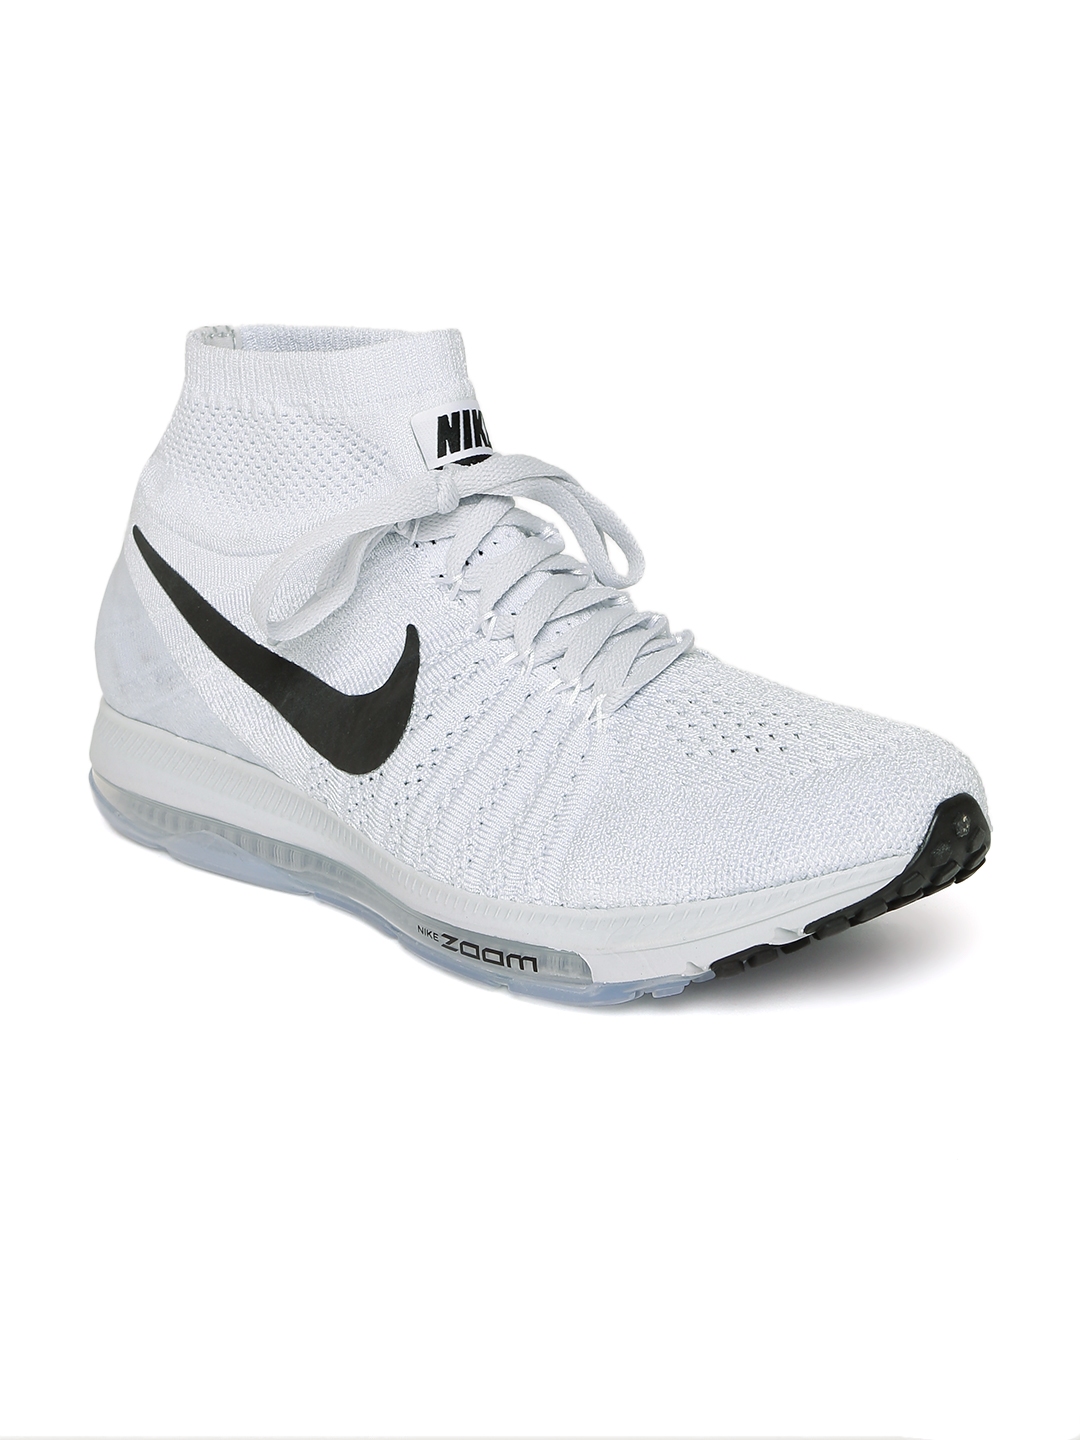 nike zoom all out price in india